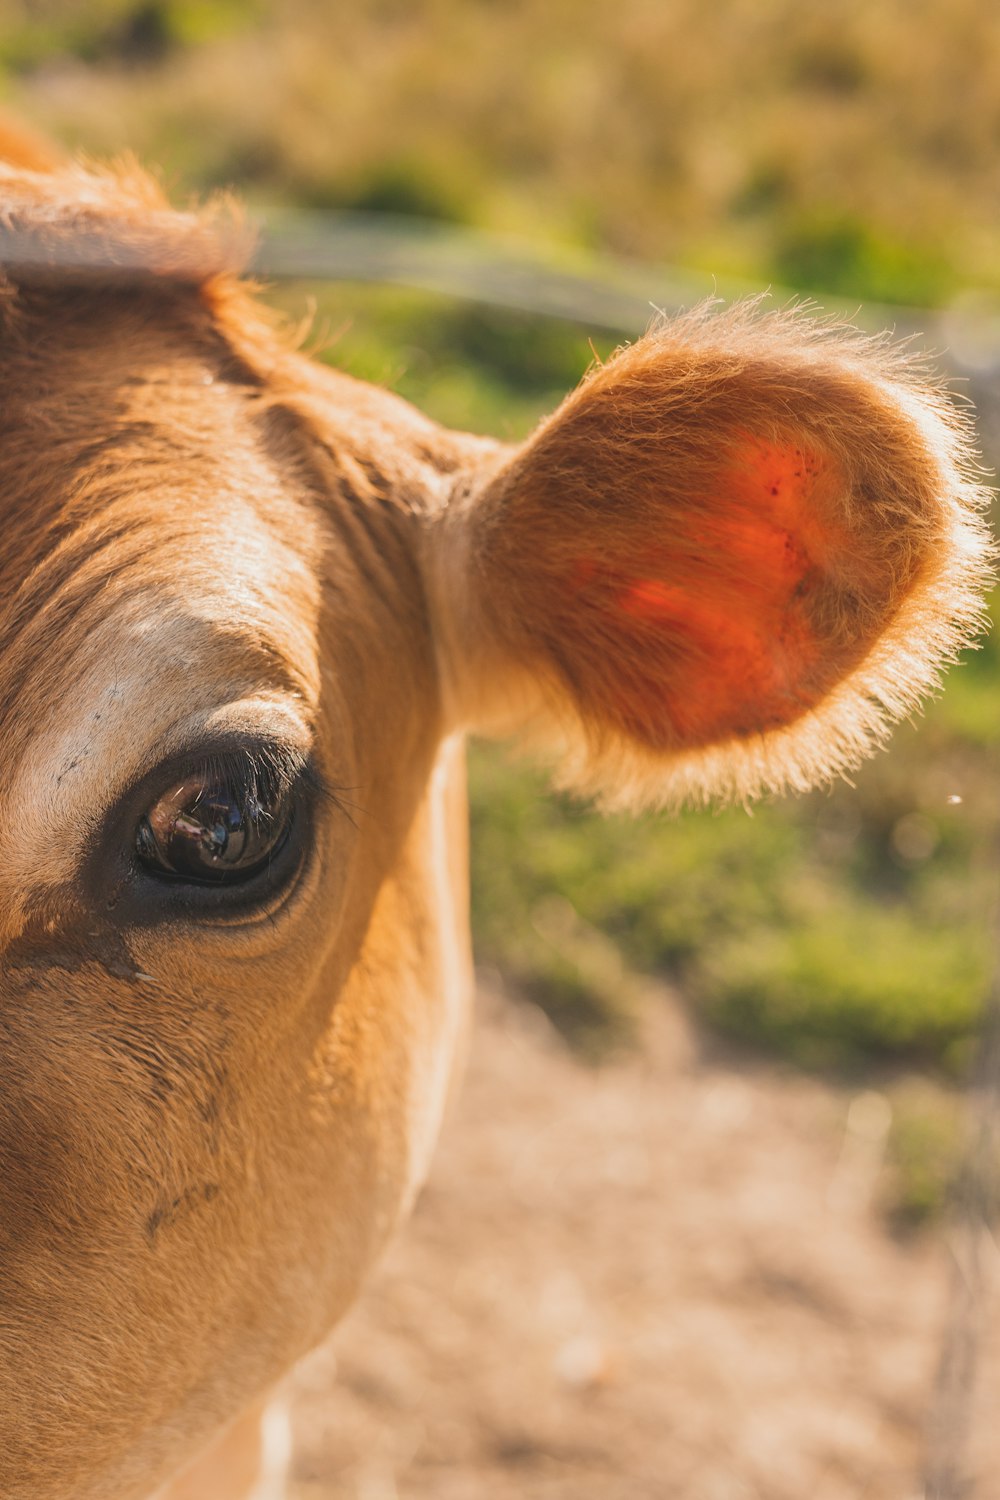 a close up of a cow's face